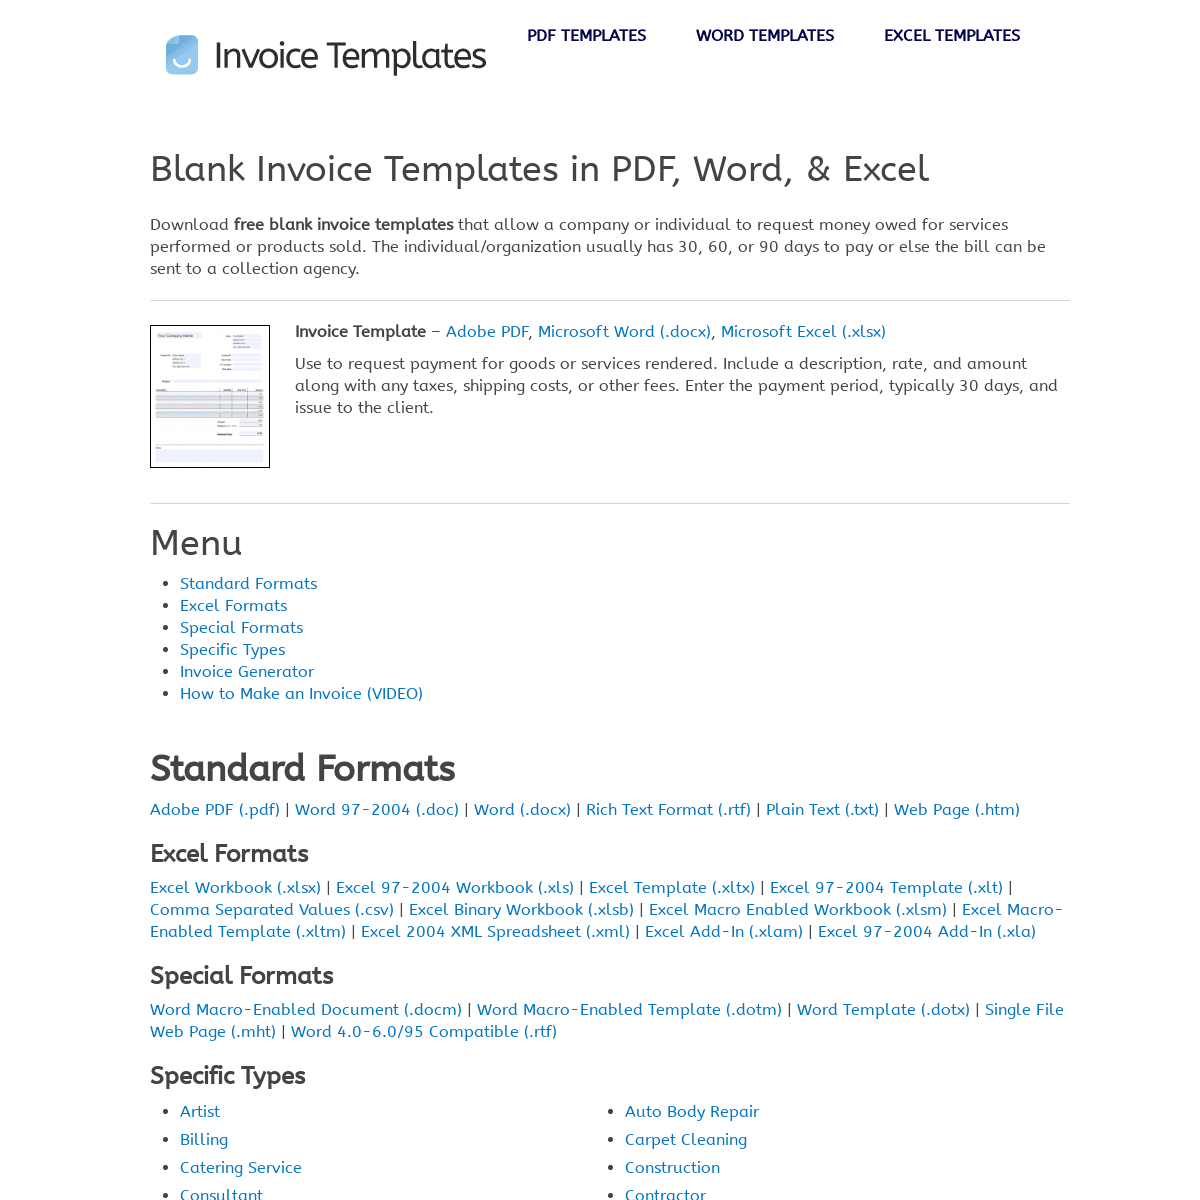 A complete backup of invoicetemplates.com